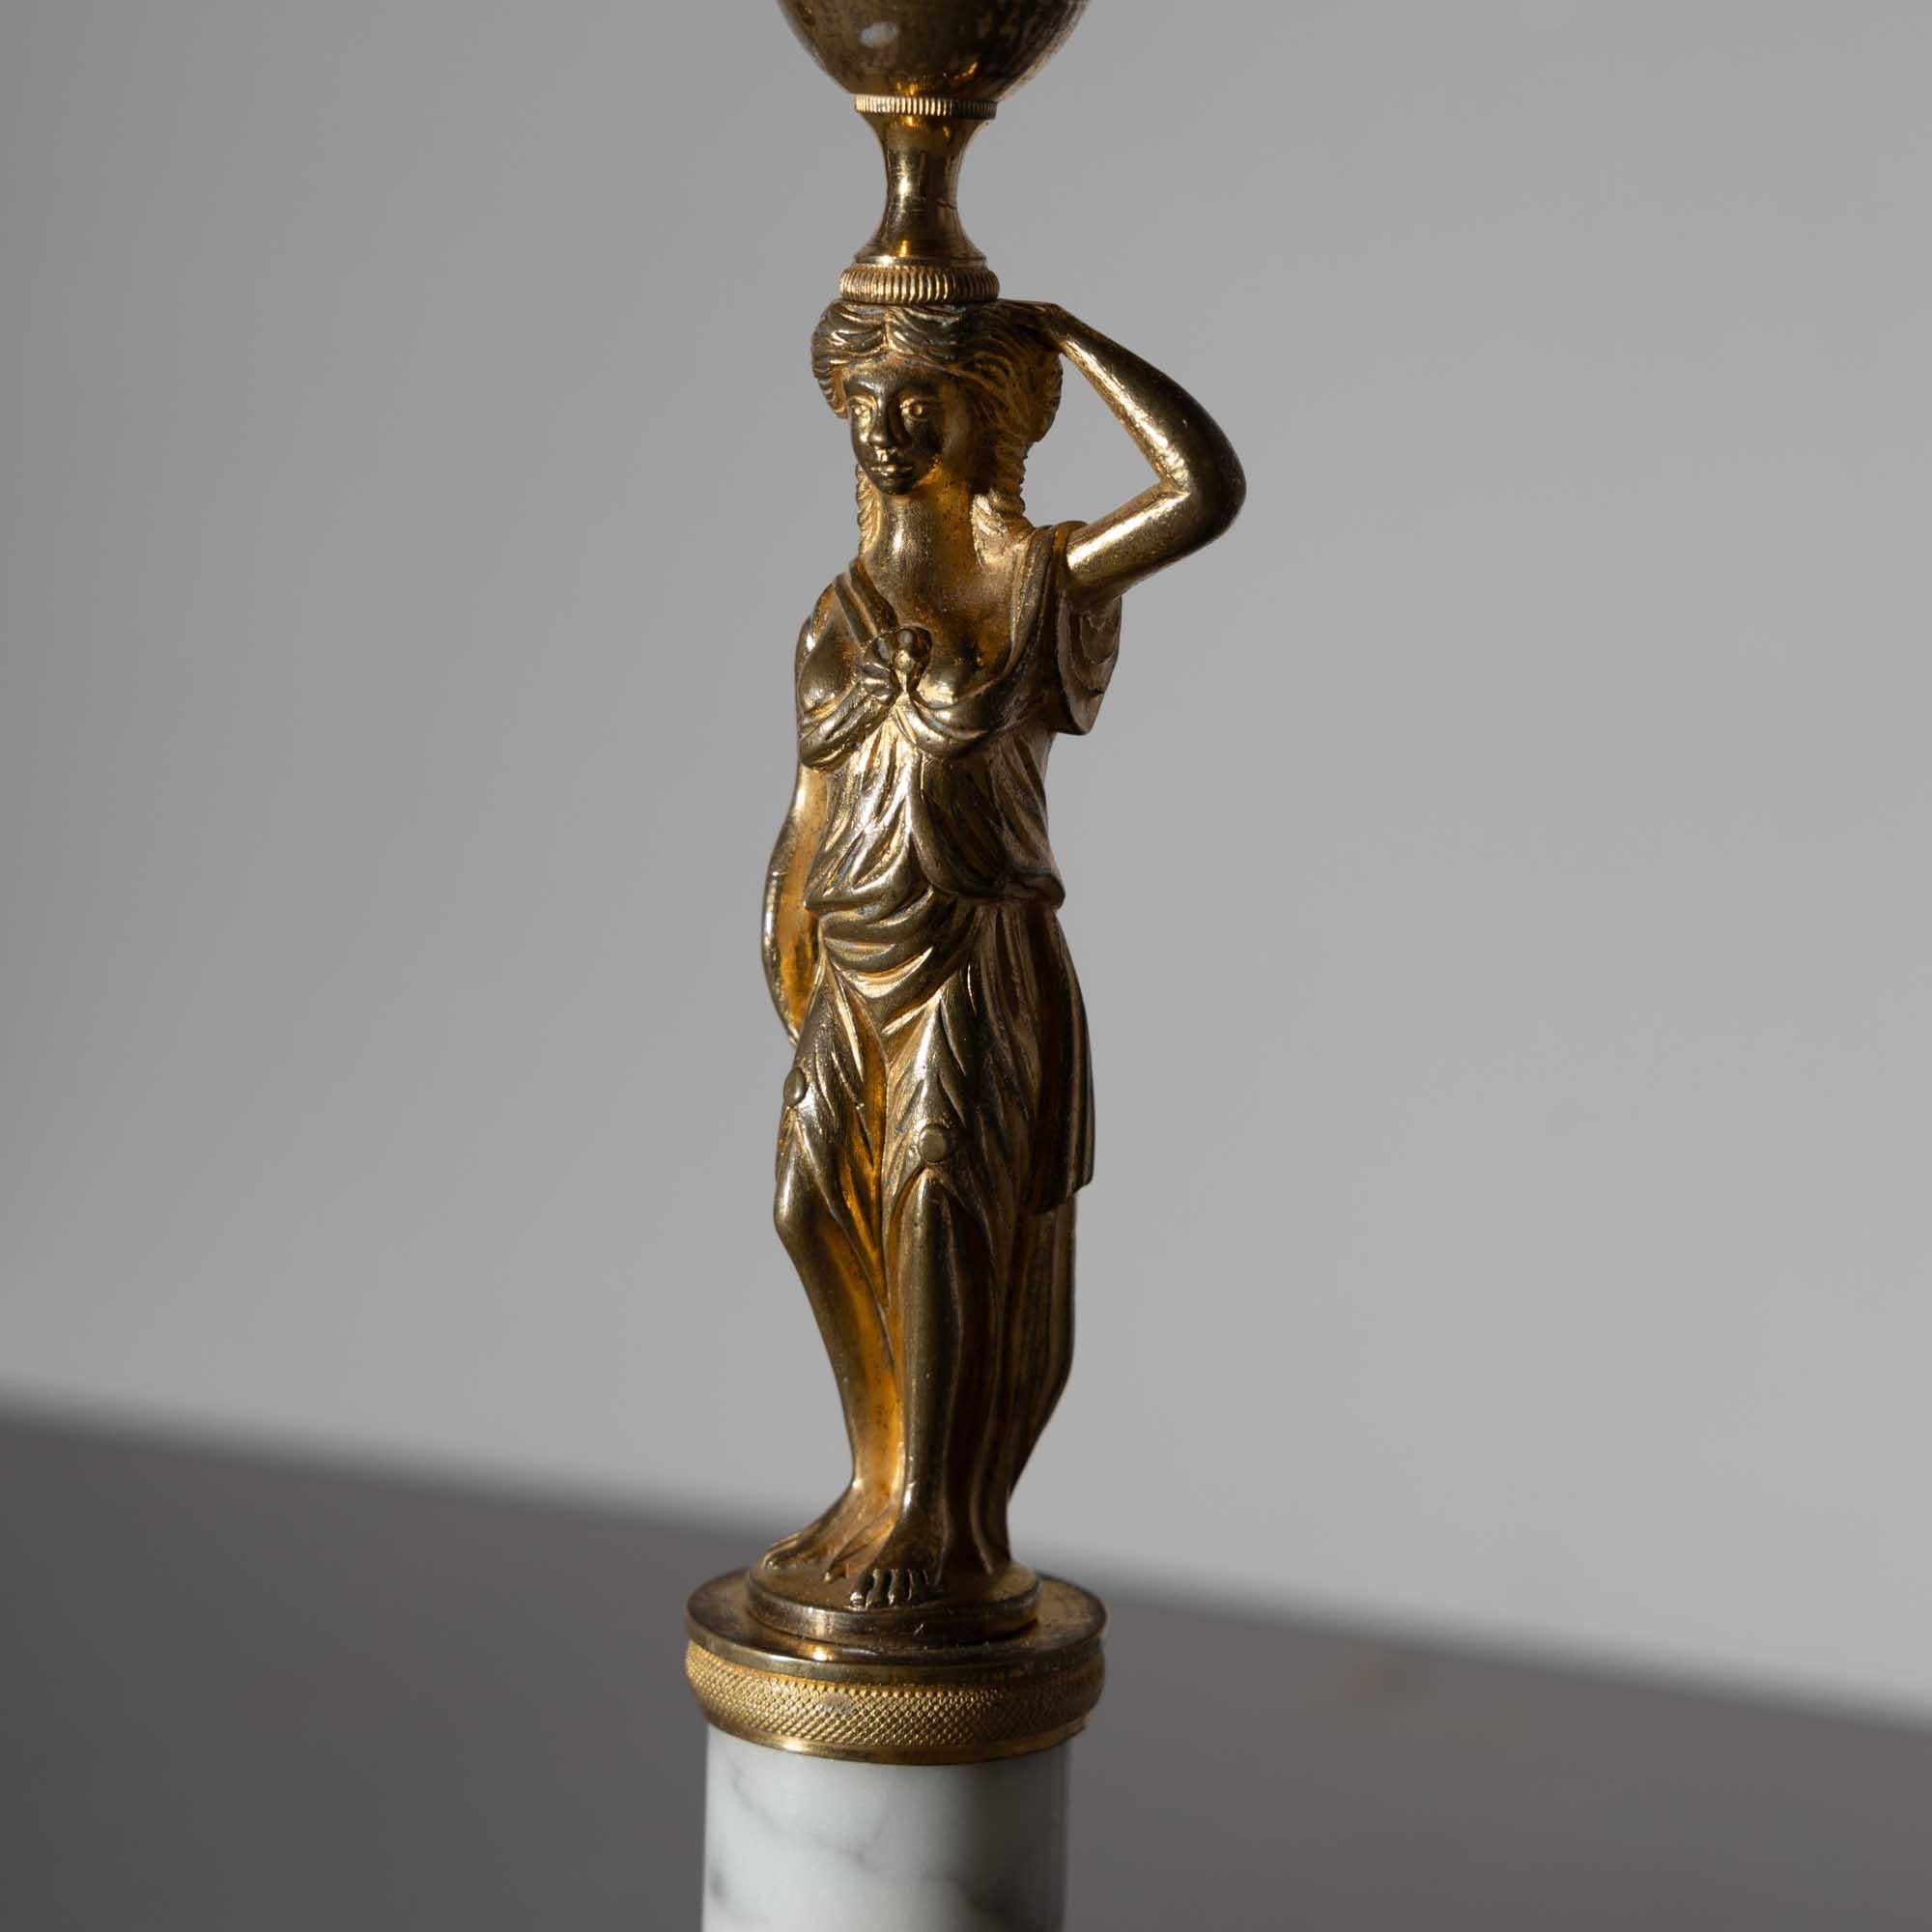 German Pair of Candleholders with Karyatids, Bronze & Marble, Berlin Early 19th Century For Sale